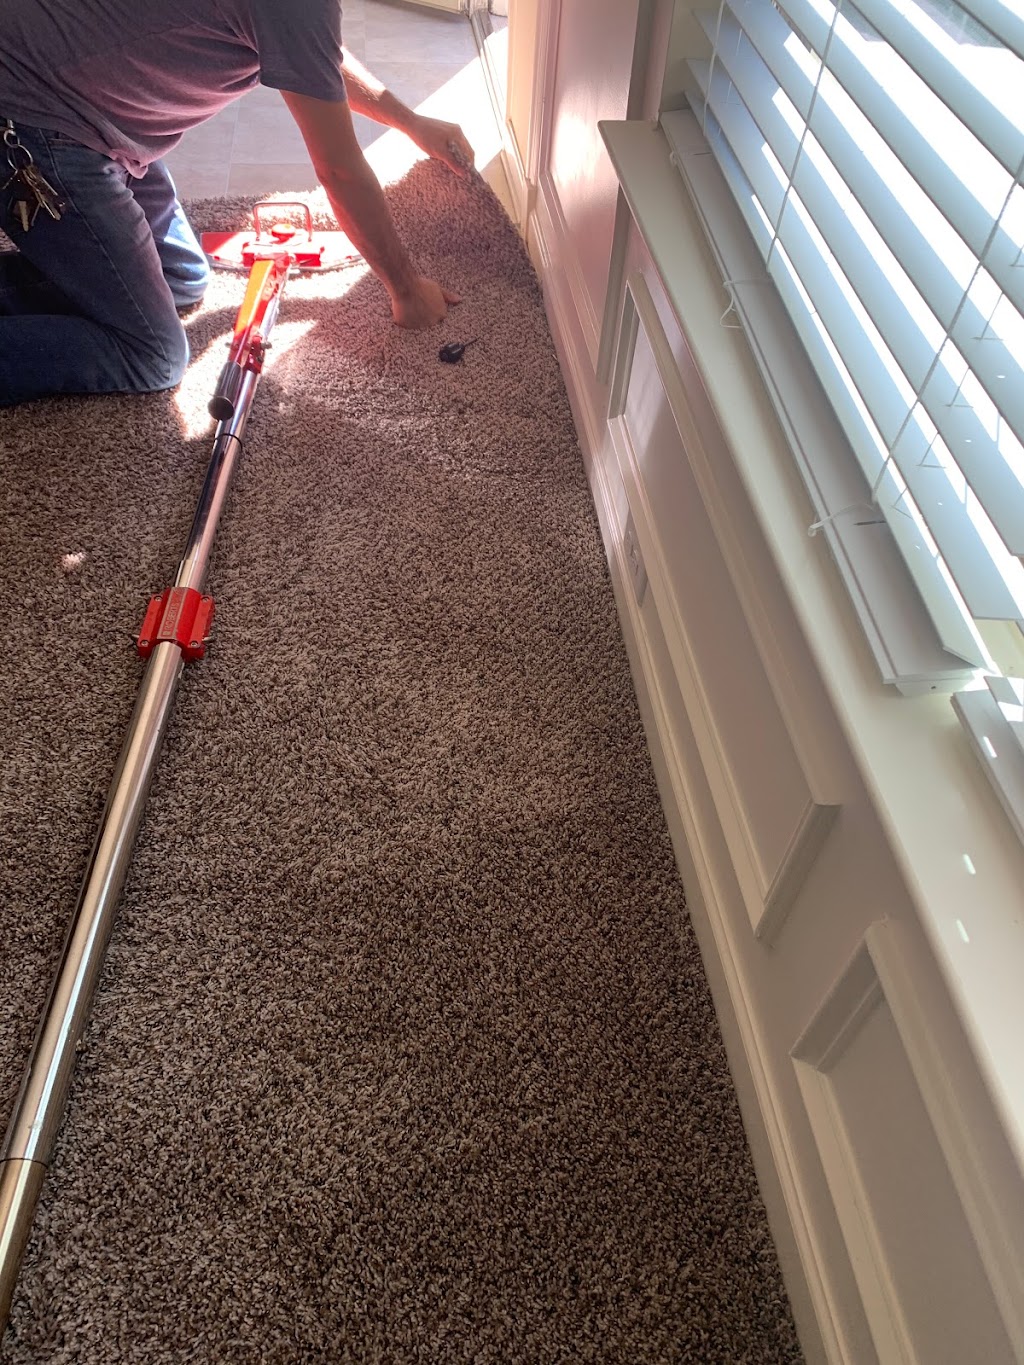 E&M Carpet Cleaning | Please change your address on the website. You are not located at, 128 Creekwood Tr, Acworth, GA 30102, USA | Phone: (678) 429-5649